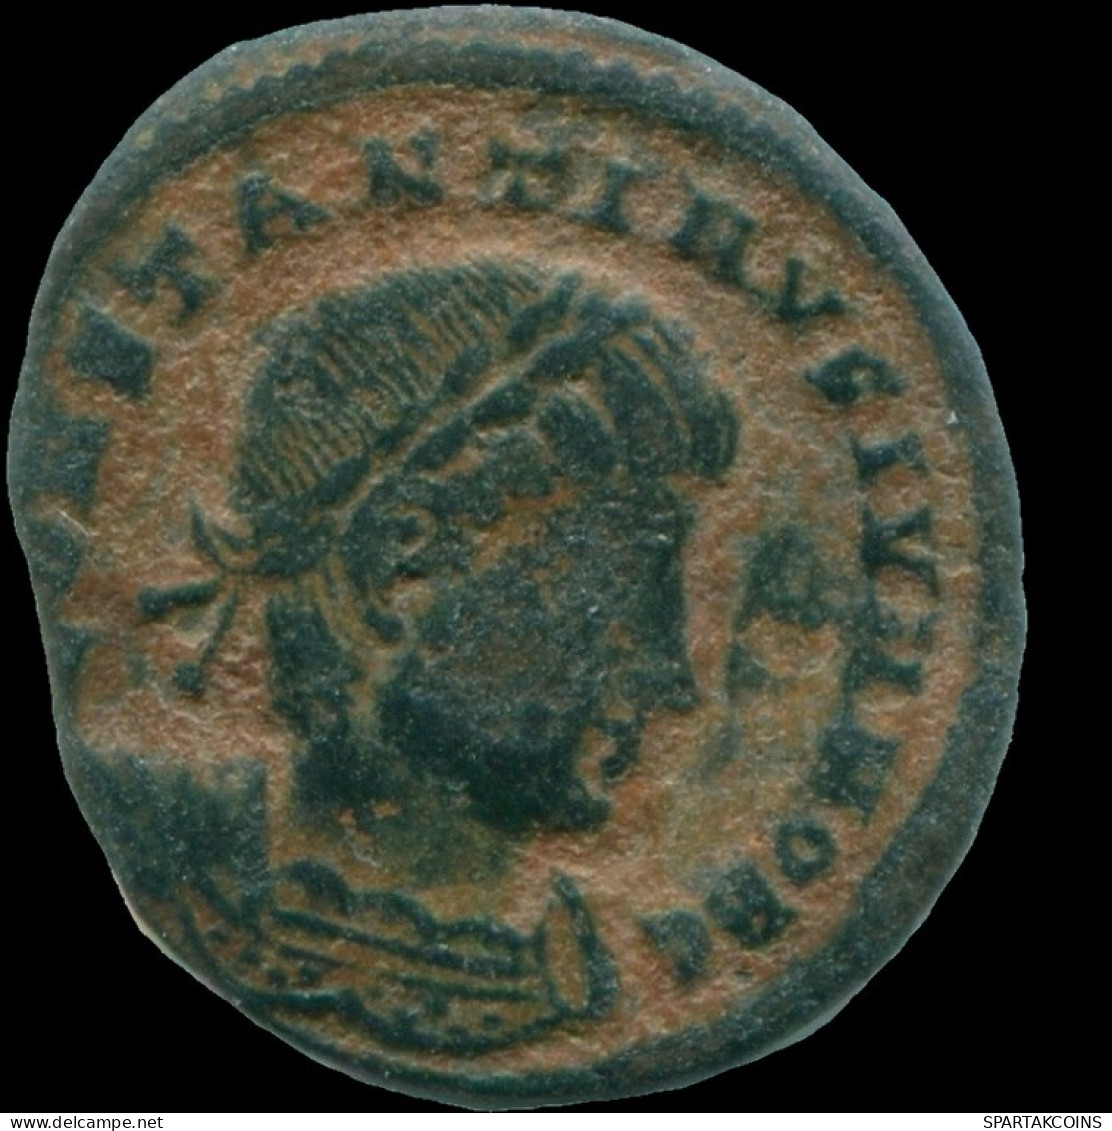 CONSTANTINE II ANTIOCH Mint ( SMAN ) GLORIA EXERCITVS SOLDIERS #ANC13190.18.E.A - The Christian Empire (307 AD To 363 AD)